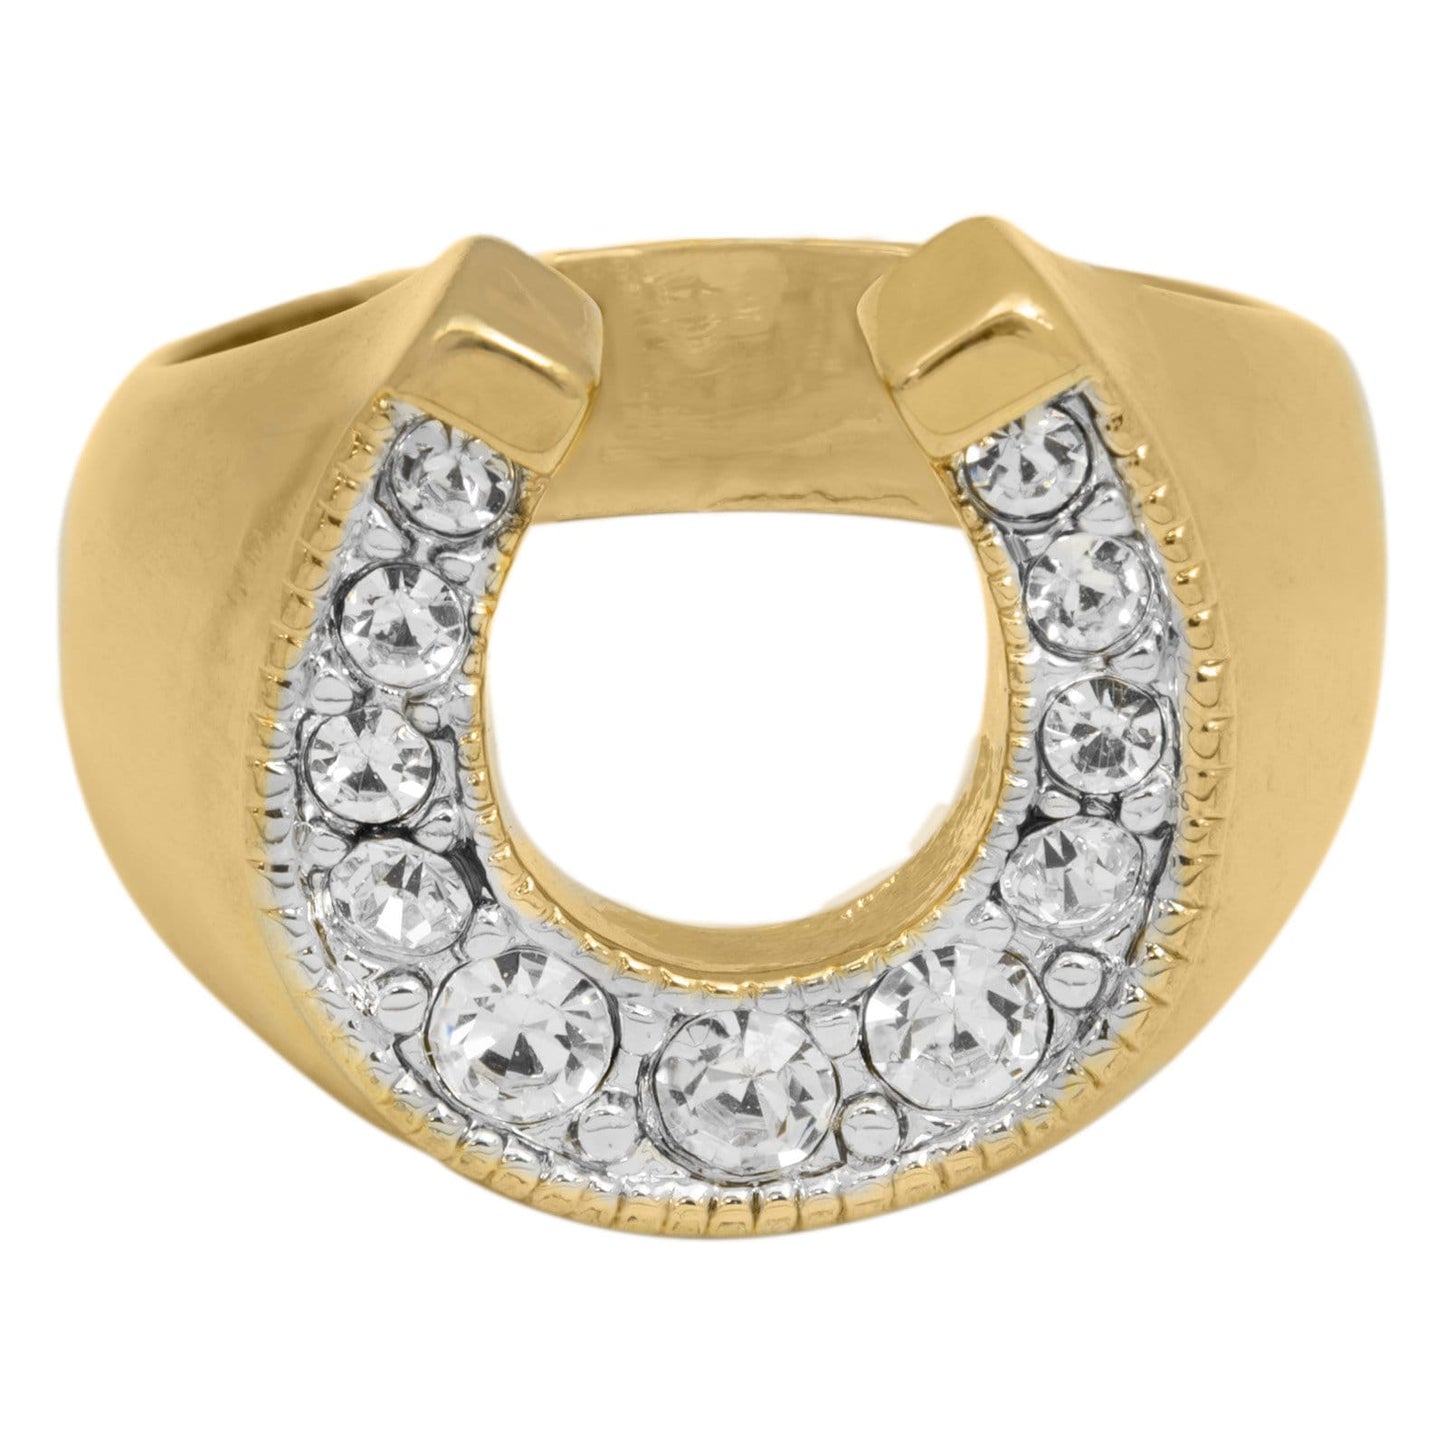 Men's Vintage Ring Equestrian Ring Horseshoe with Austrian Crystals Handcrafted 18k Gold Men Antique Jewelry R6005